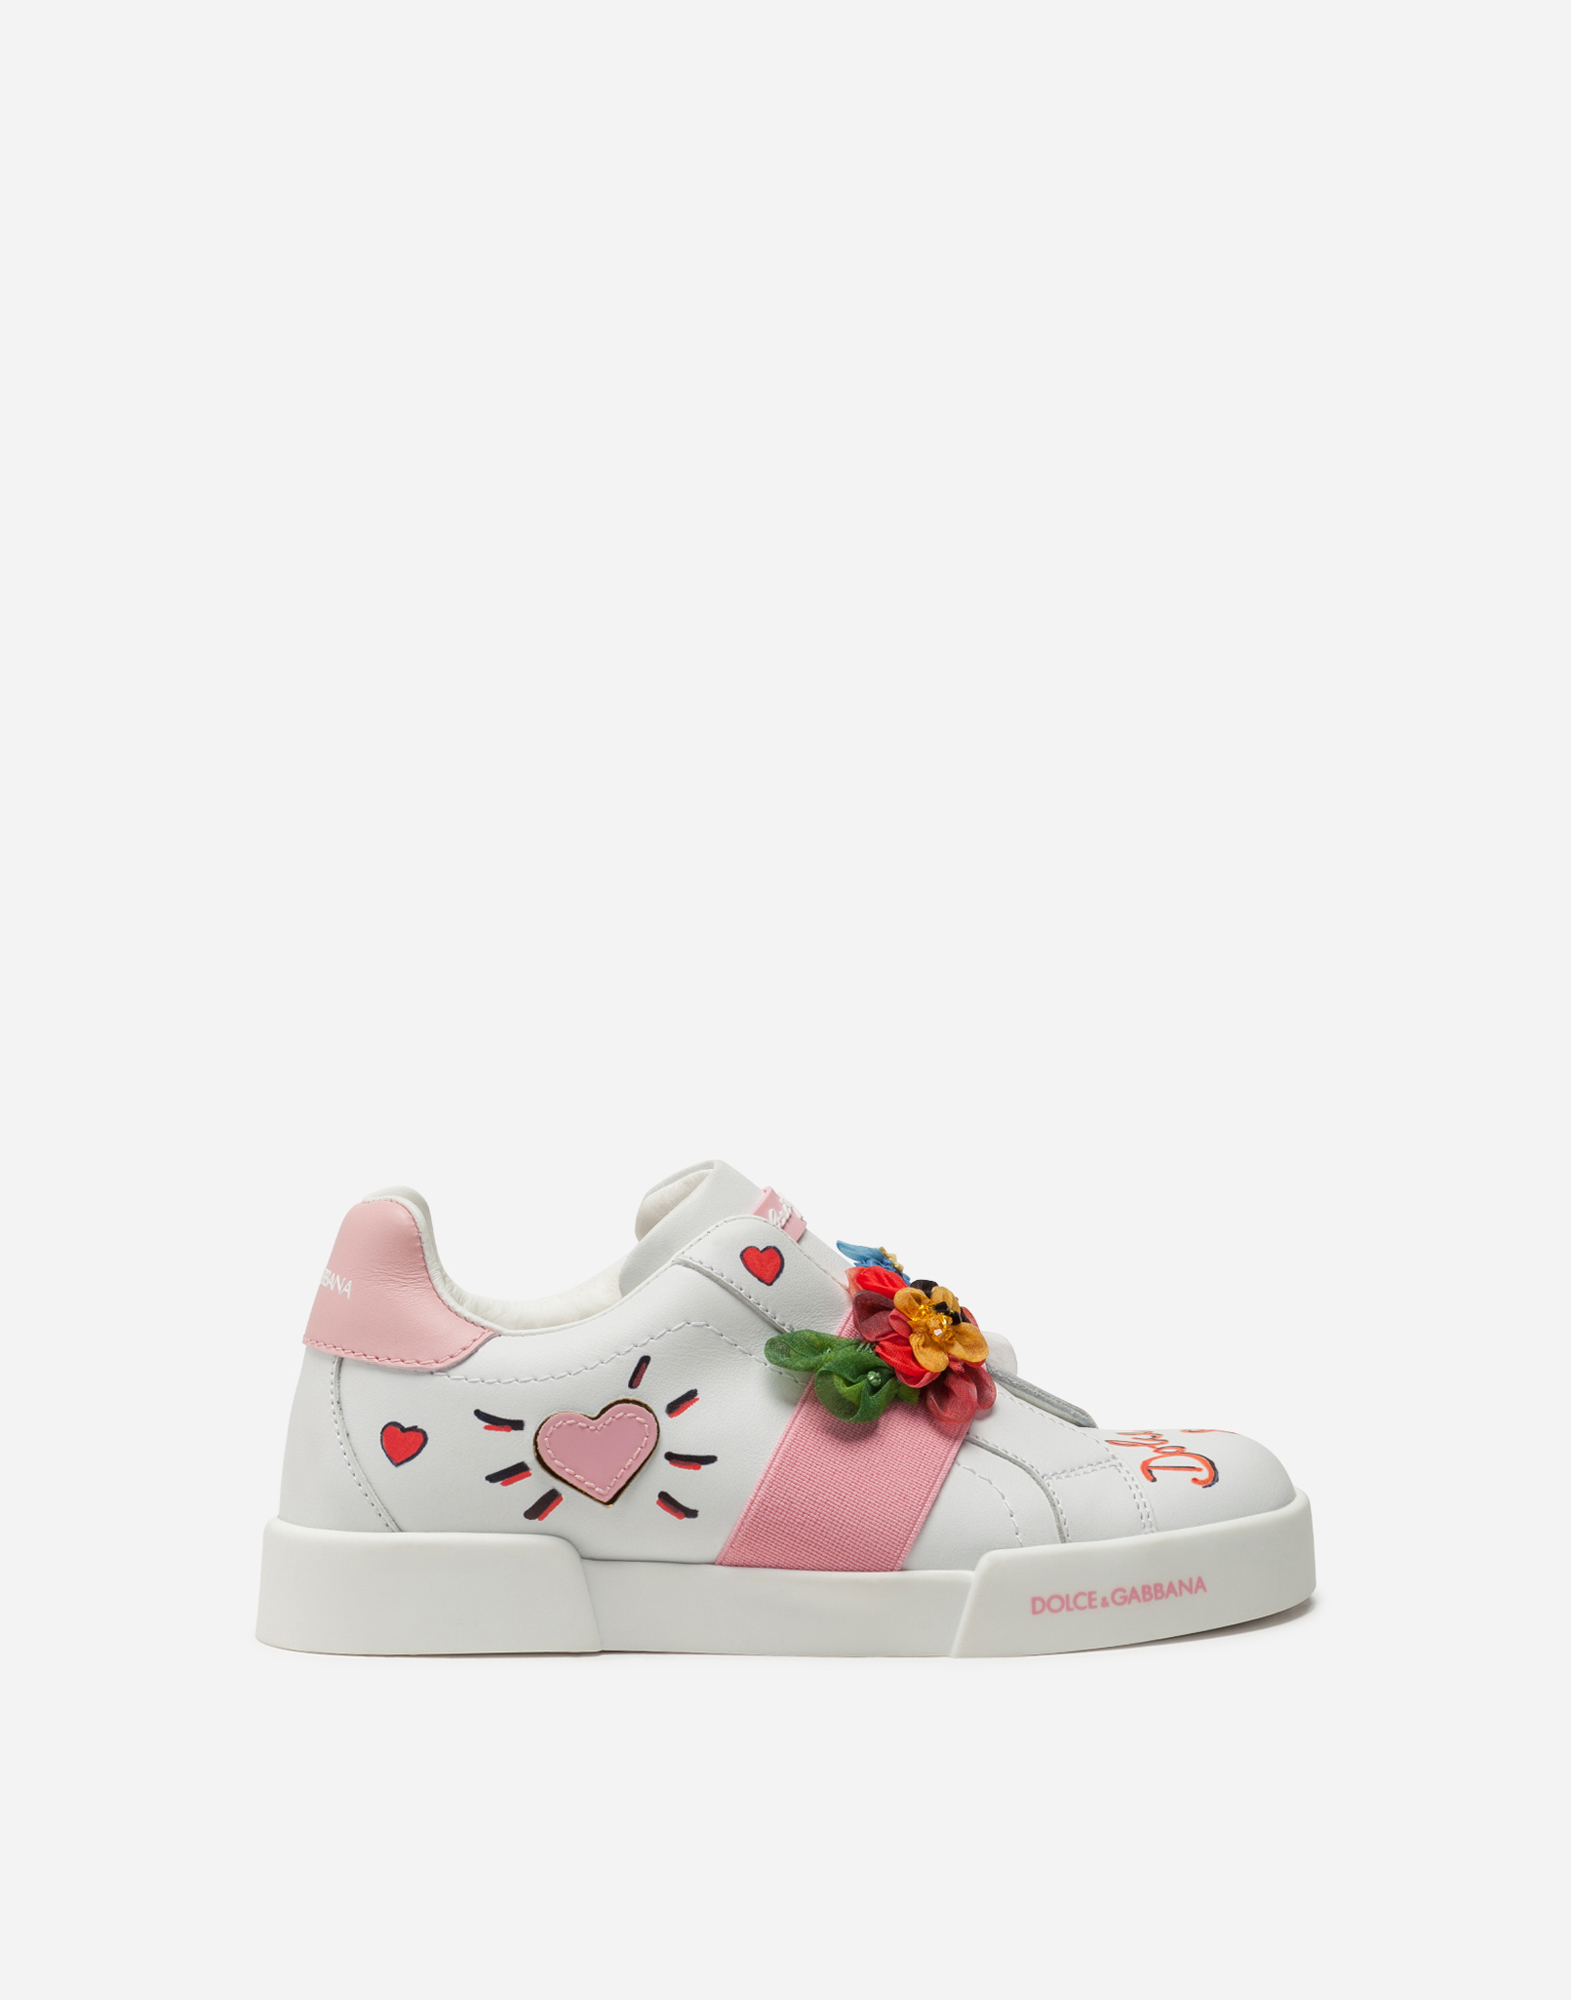 Dolce & Gabbana Kids' Portofino Light Sneakers In Calfskin With Embroidery